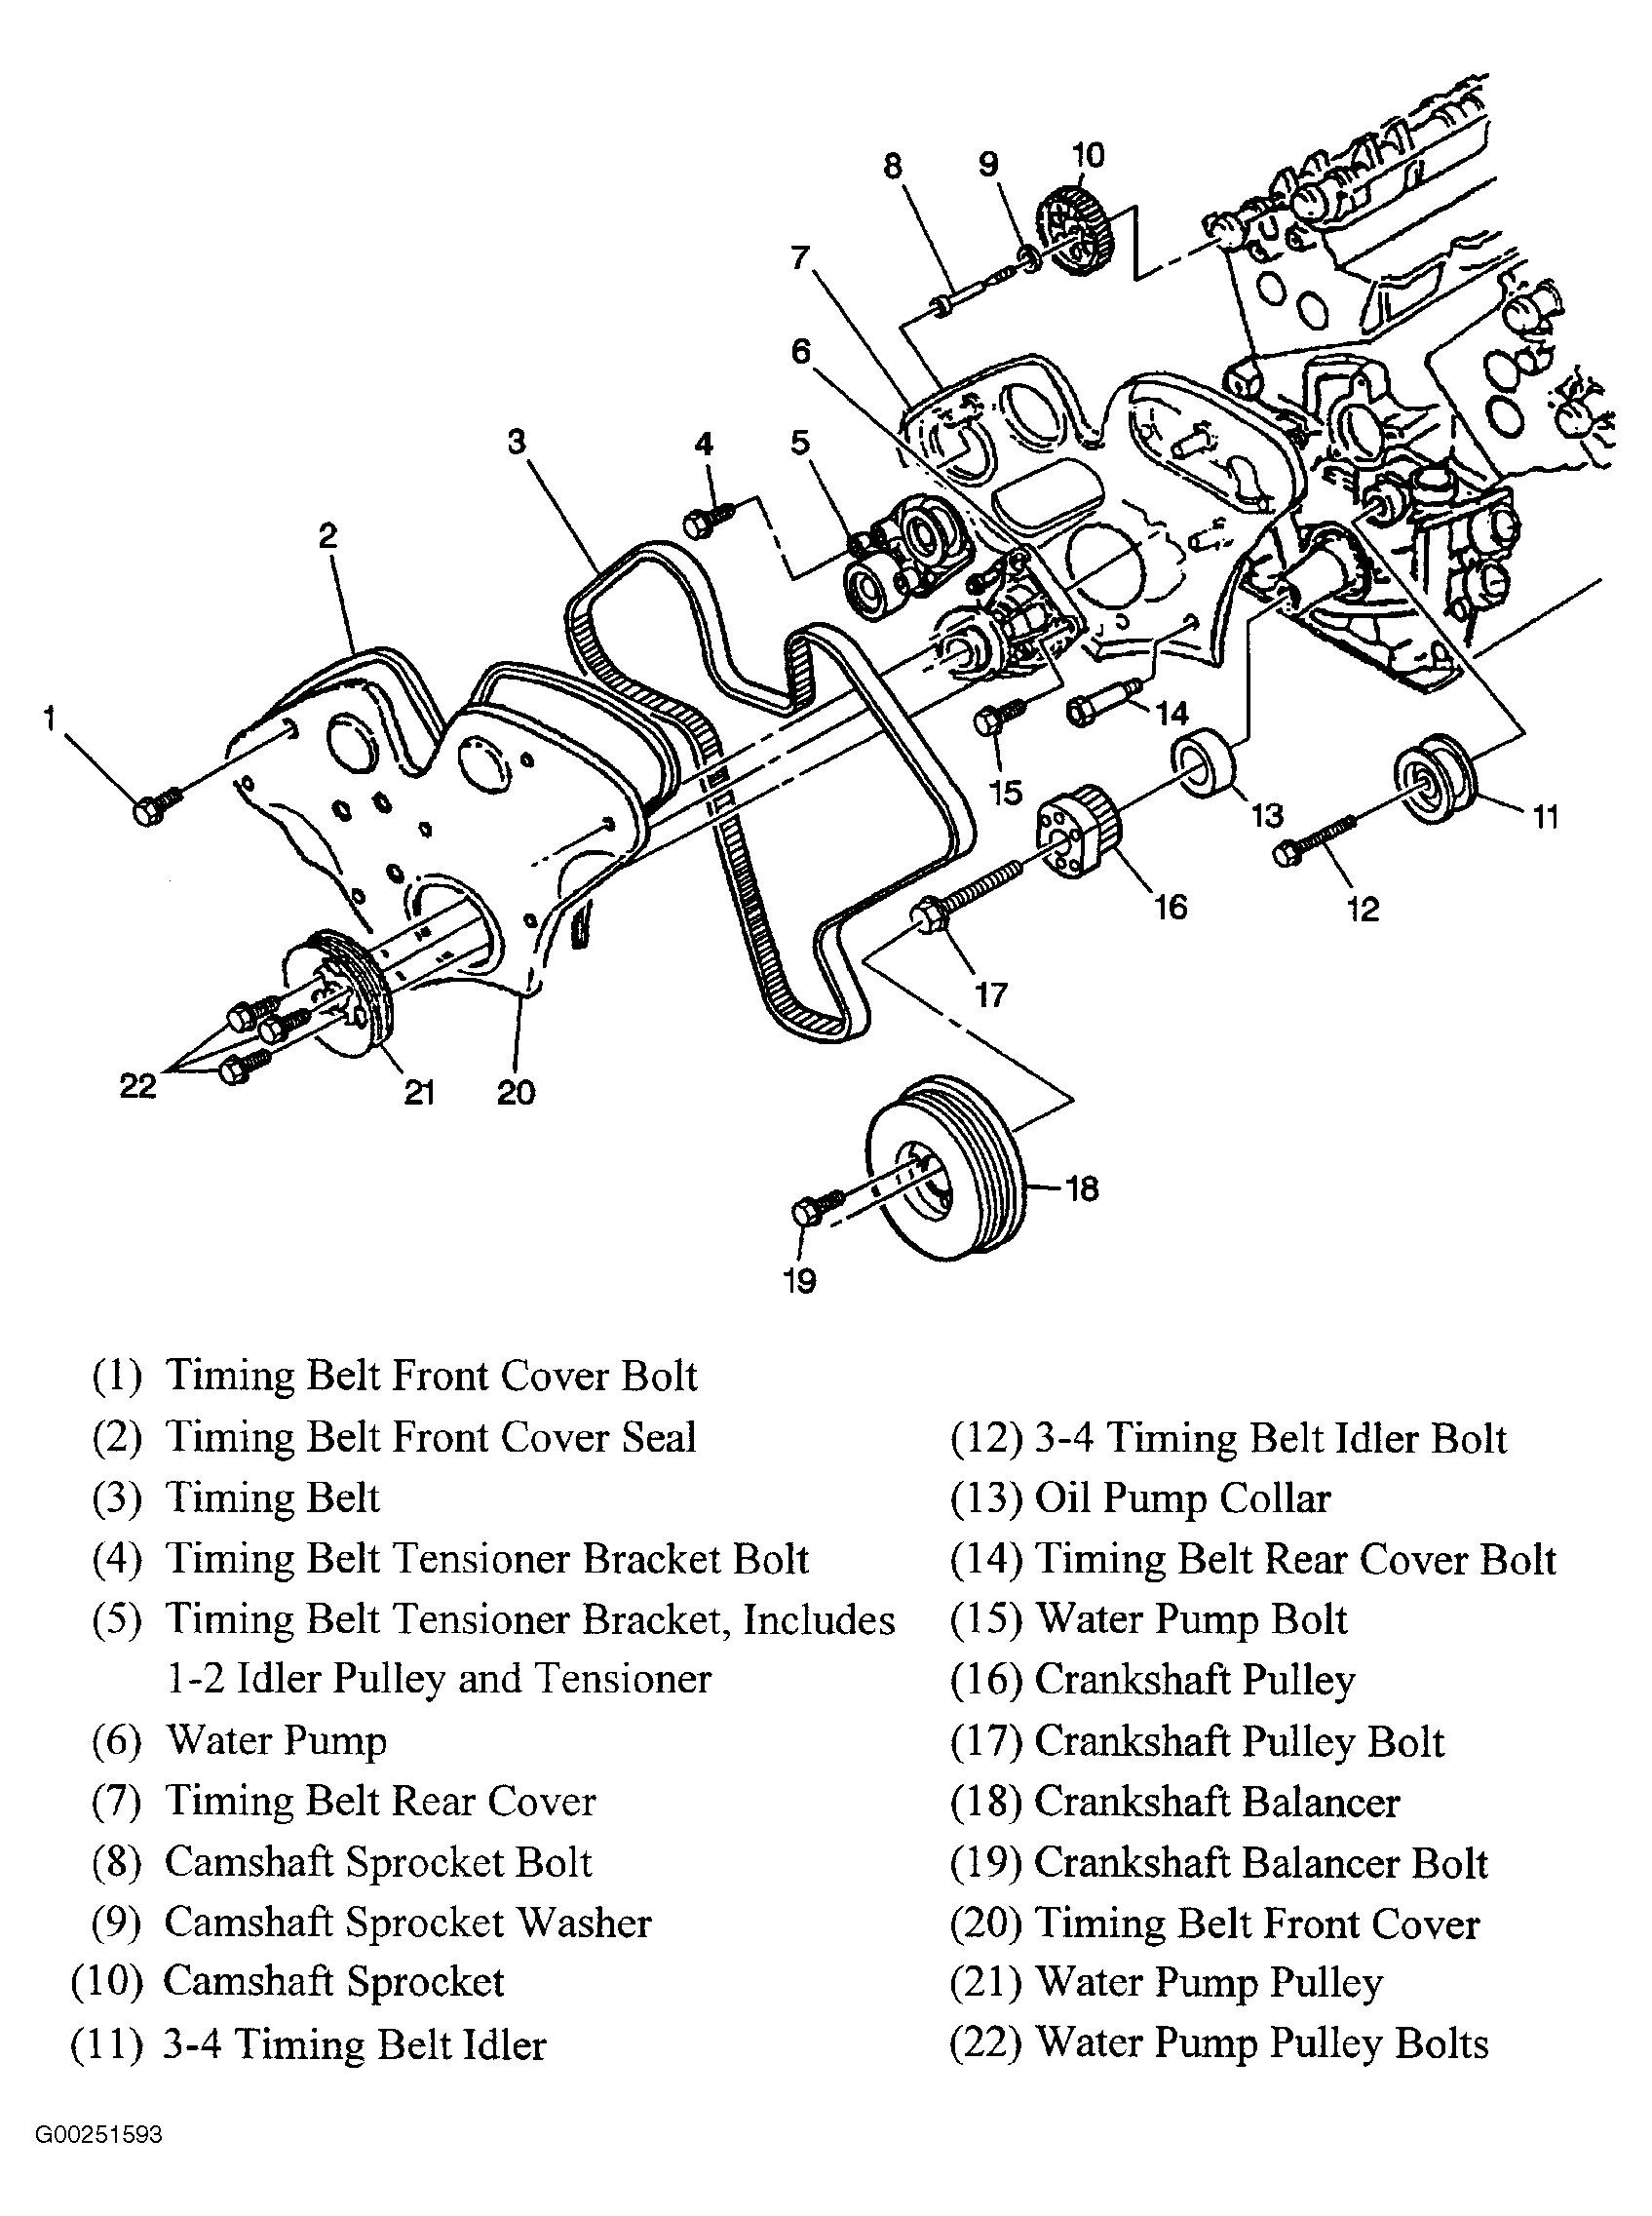 Diagram Of A Engine 2003 Cadillac Cts Serpentine Belt Diagram Auto Of Diagram Of A Engine